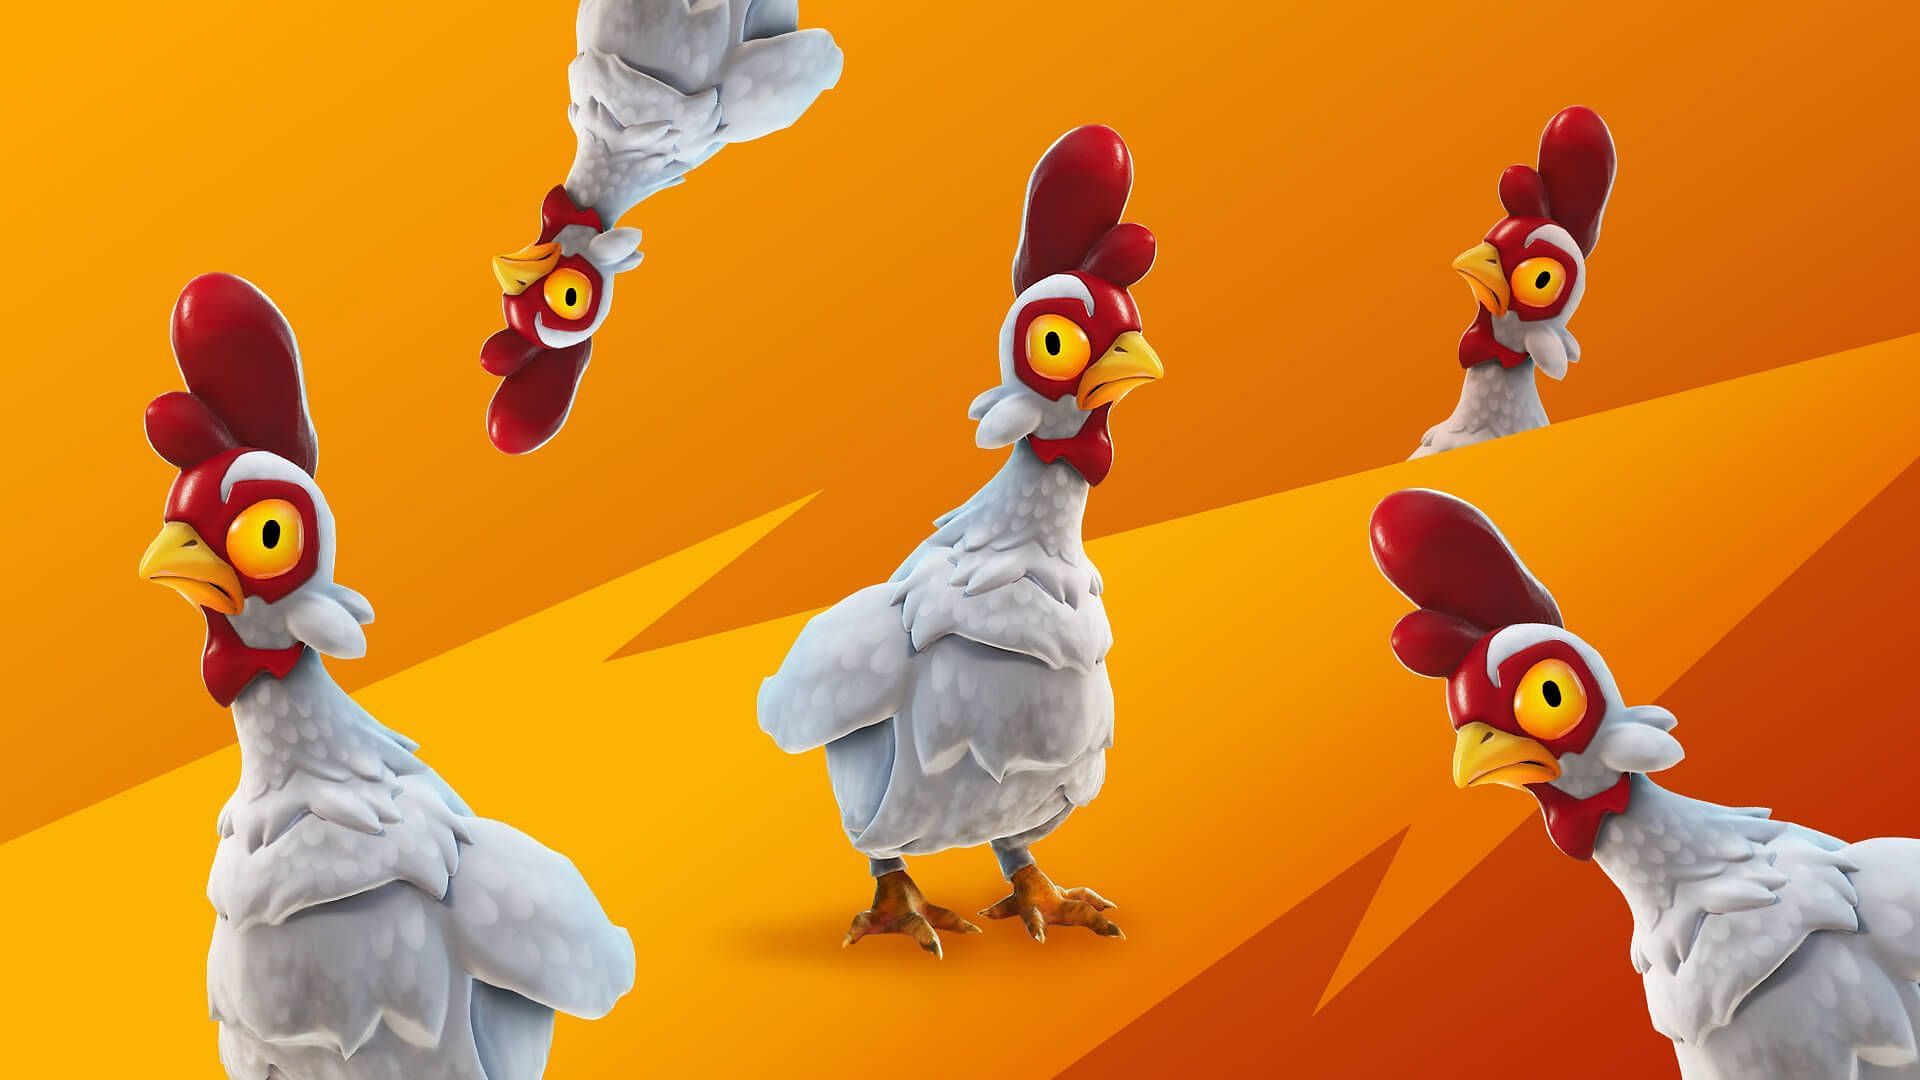 &quot;Tragically, this chicken is not moddable&quot;: Fortnite streamer tries to mod chicken, community left in splits